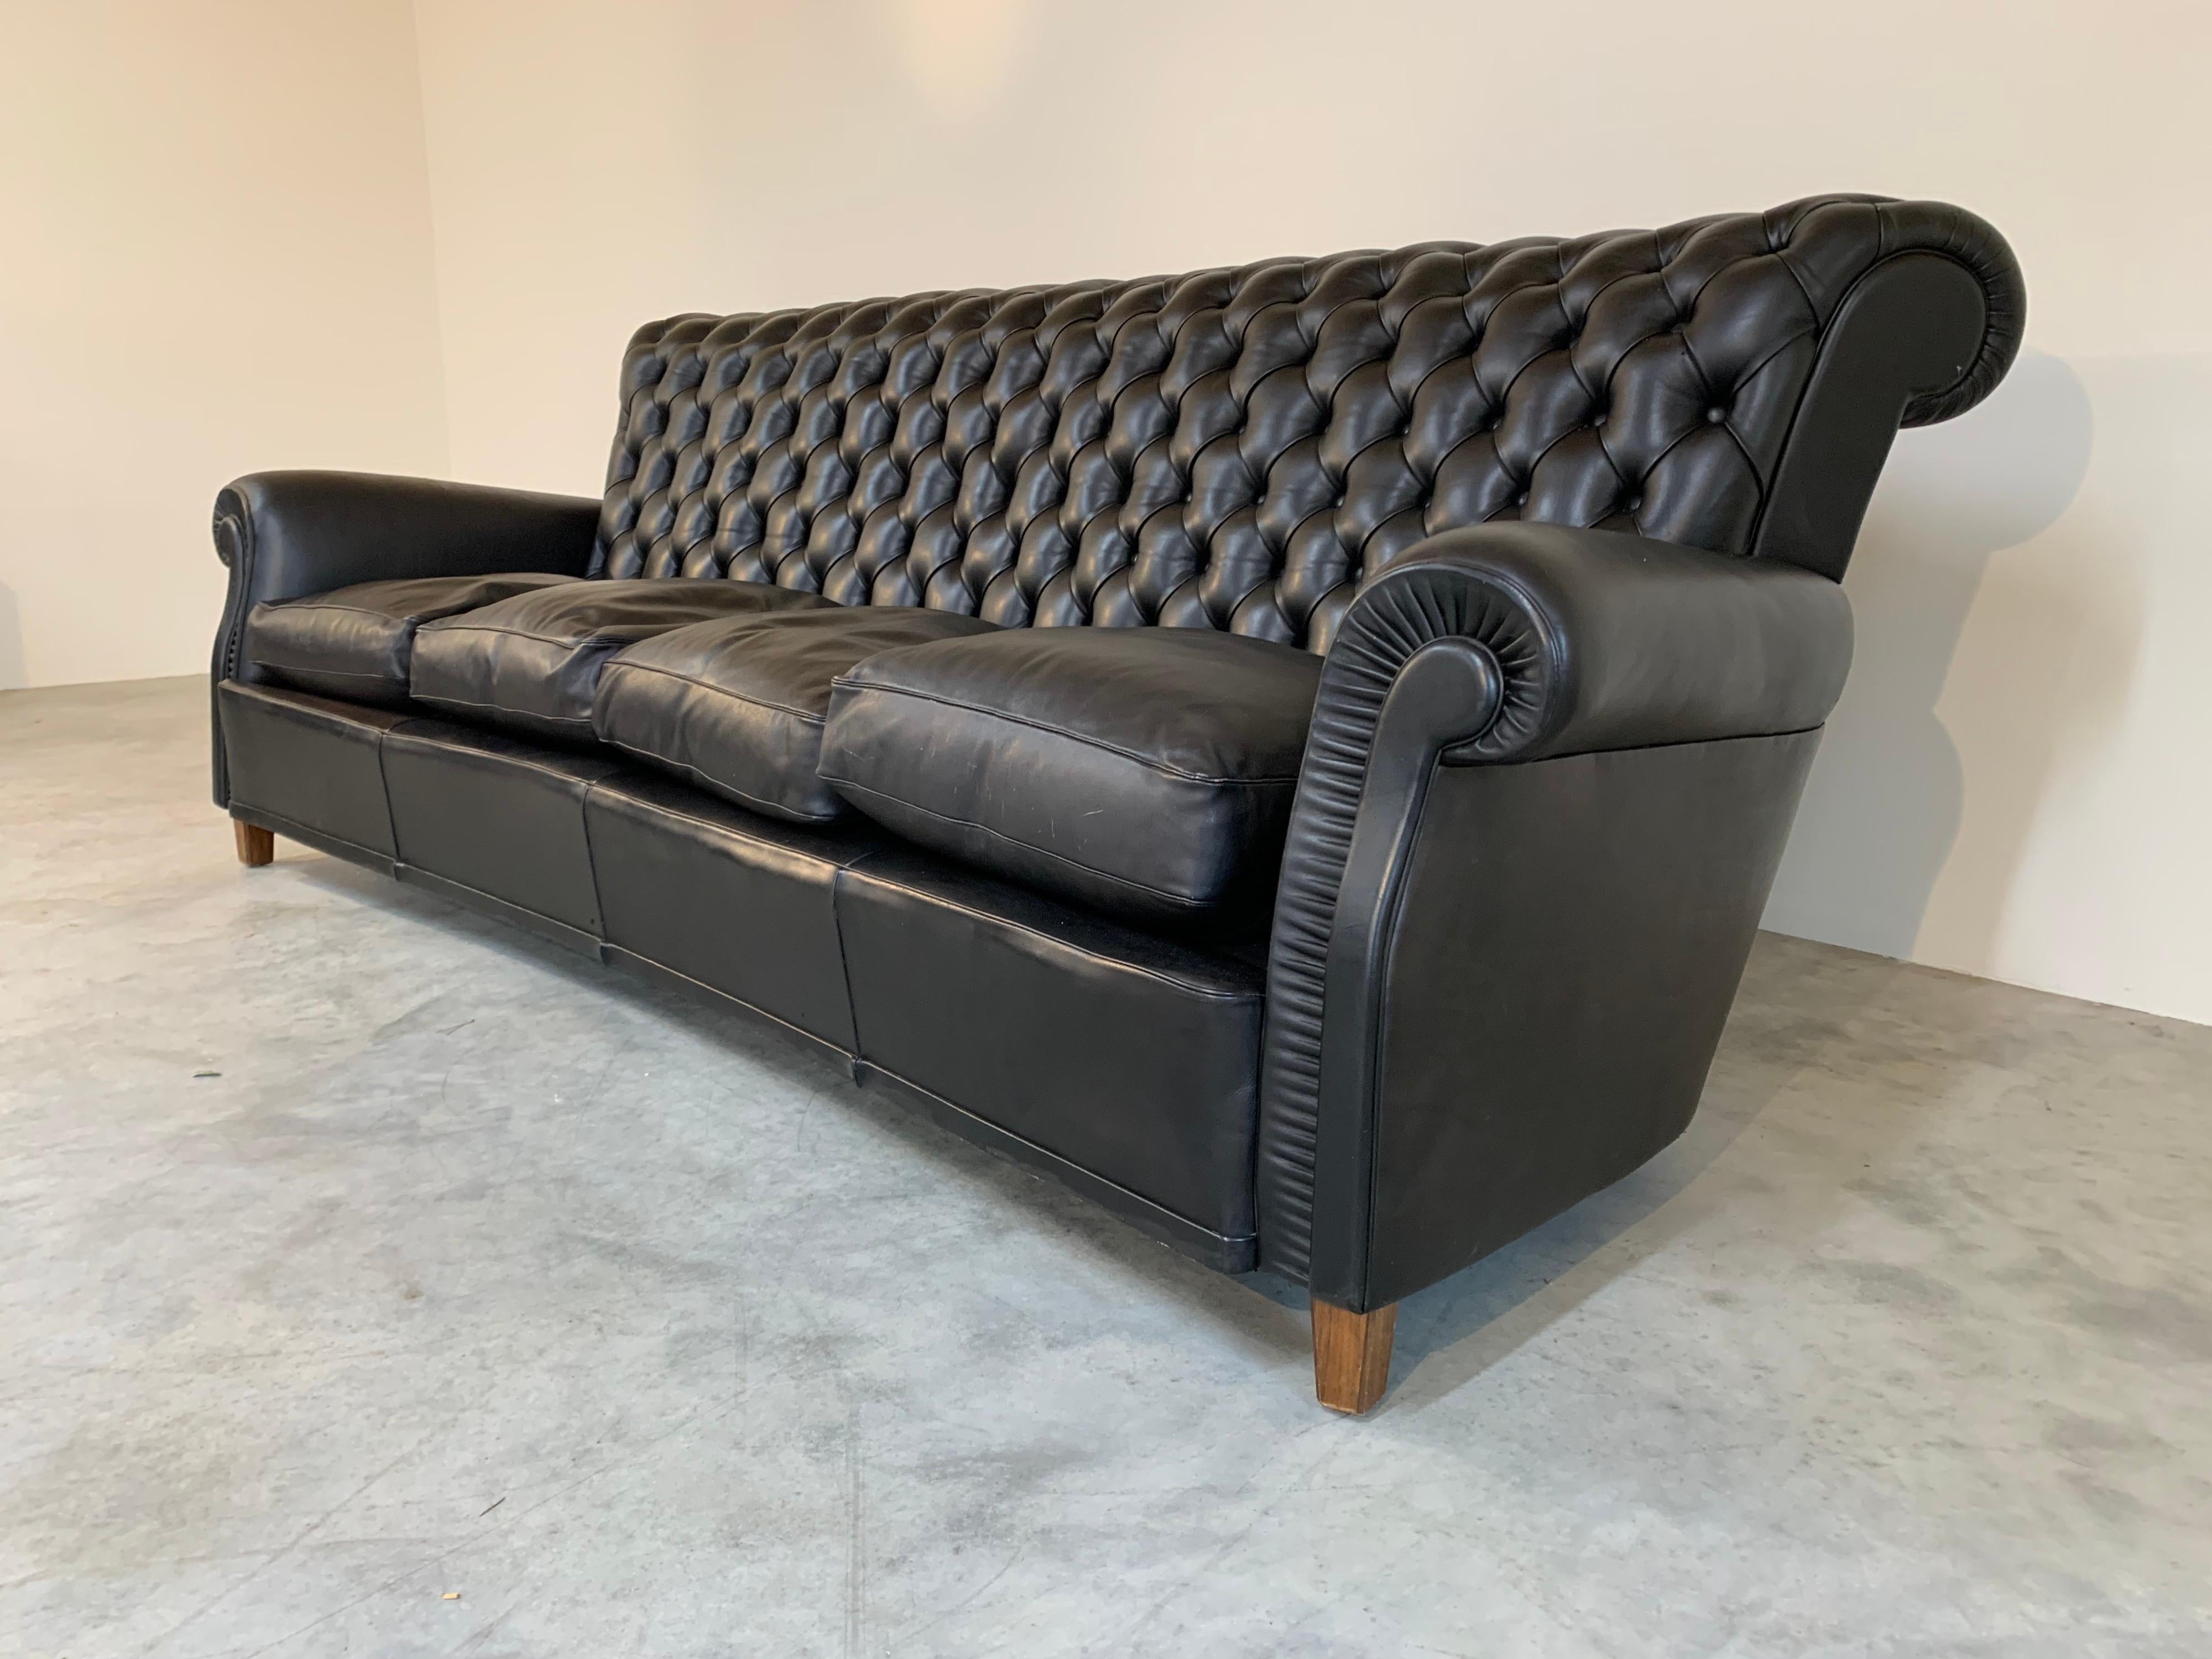 “Bonnie” Sofa by Poltrona Frau. 
 Curved frame having tufted black leather with overstuffed down cushions. -Italy 1967
Imported by the original owner who was a retired professional basketball player from the Italian League. 
 Regularly treated